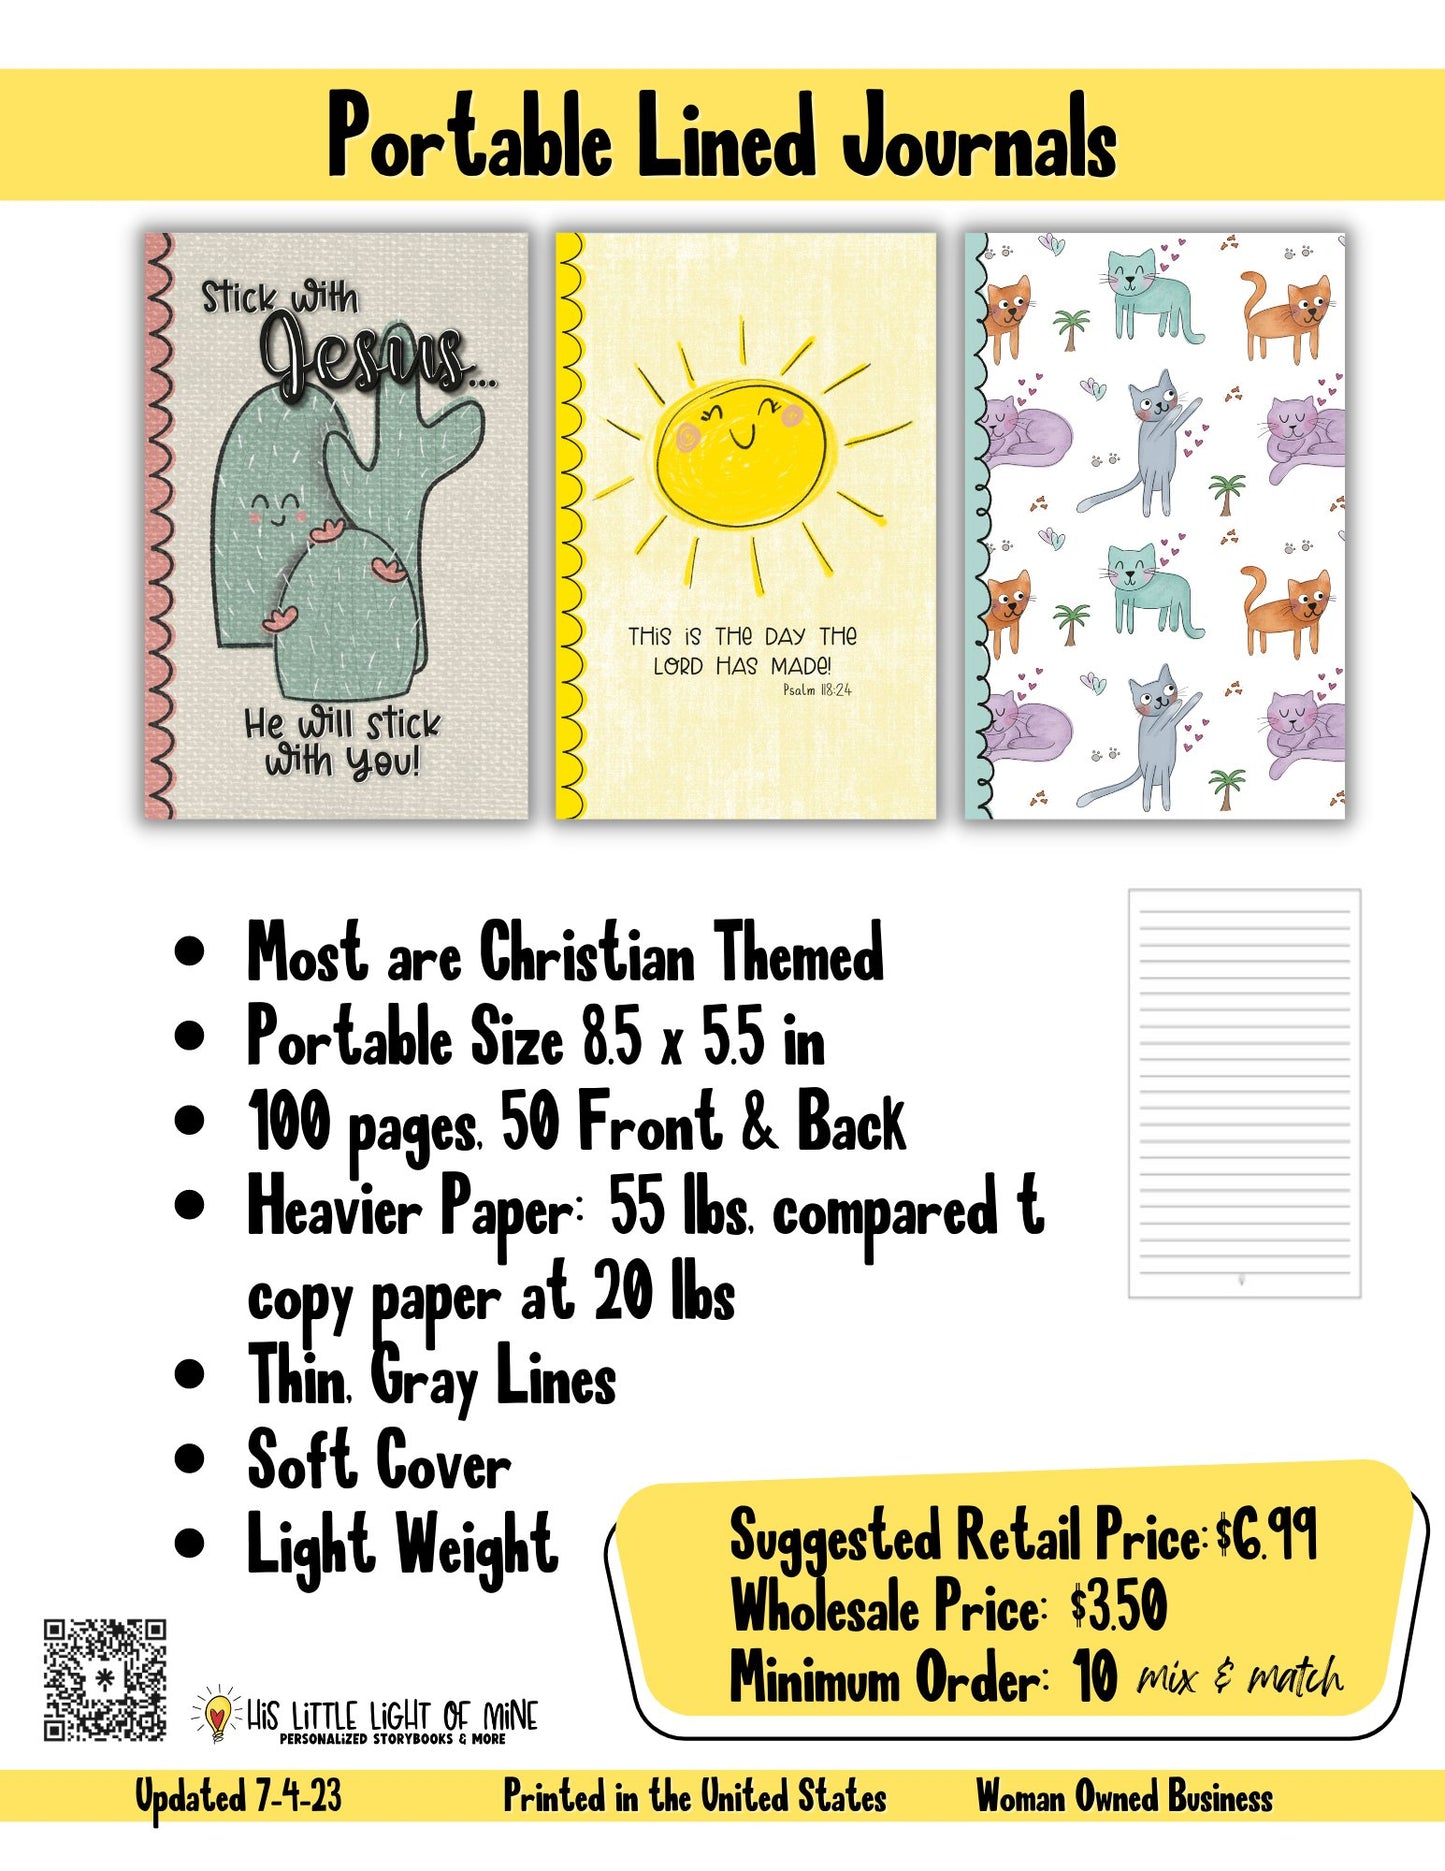 Wholesale ad of the variety of standard sized lined journals self-published through Amazon Kindle Direct Publishing